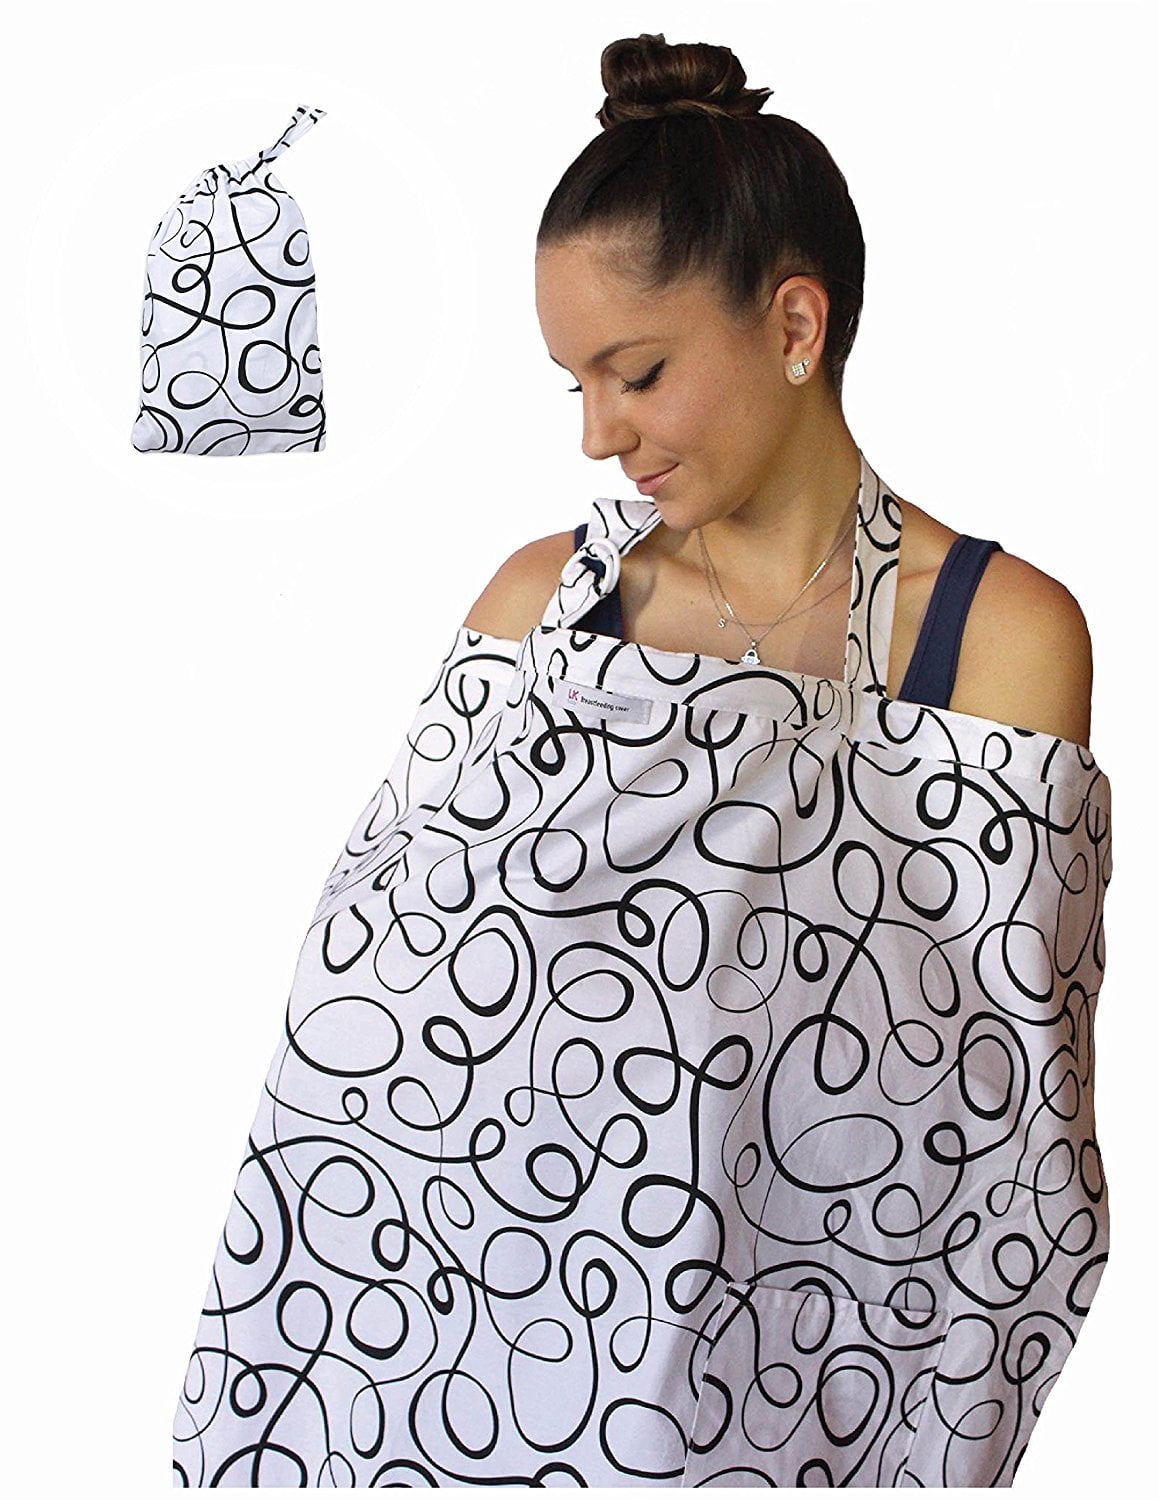 LK Baby Breastfeeding Nursing Cover Apron Privacy Cover Pumping Supplies  for New Moms with Matching Travel Pouch Multi Use Lightweight Soft Cotton 